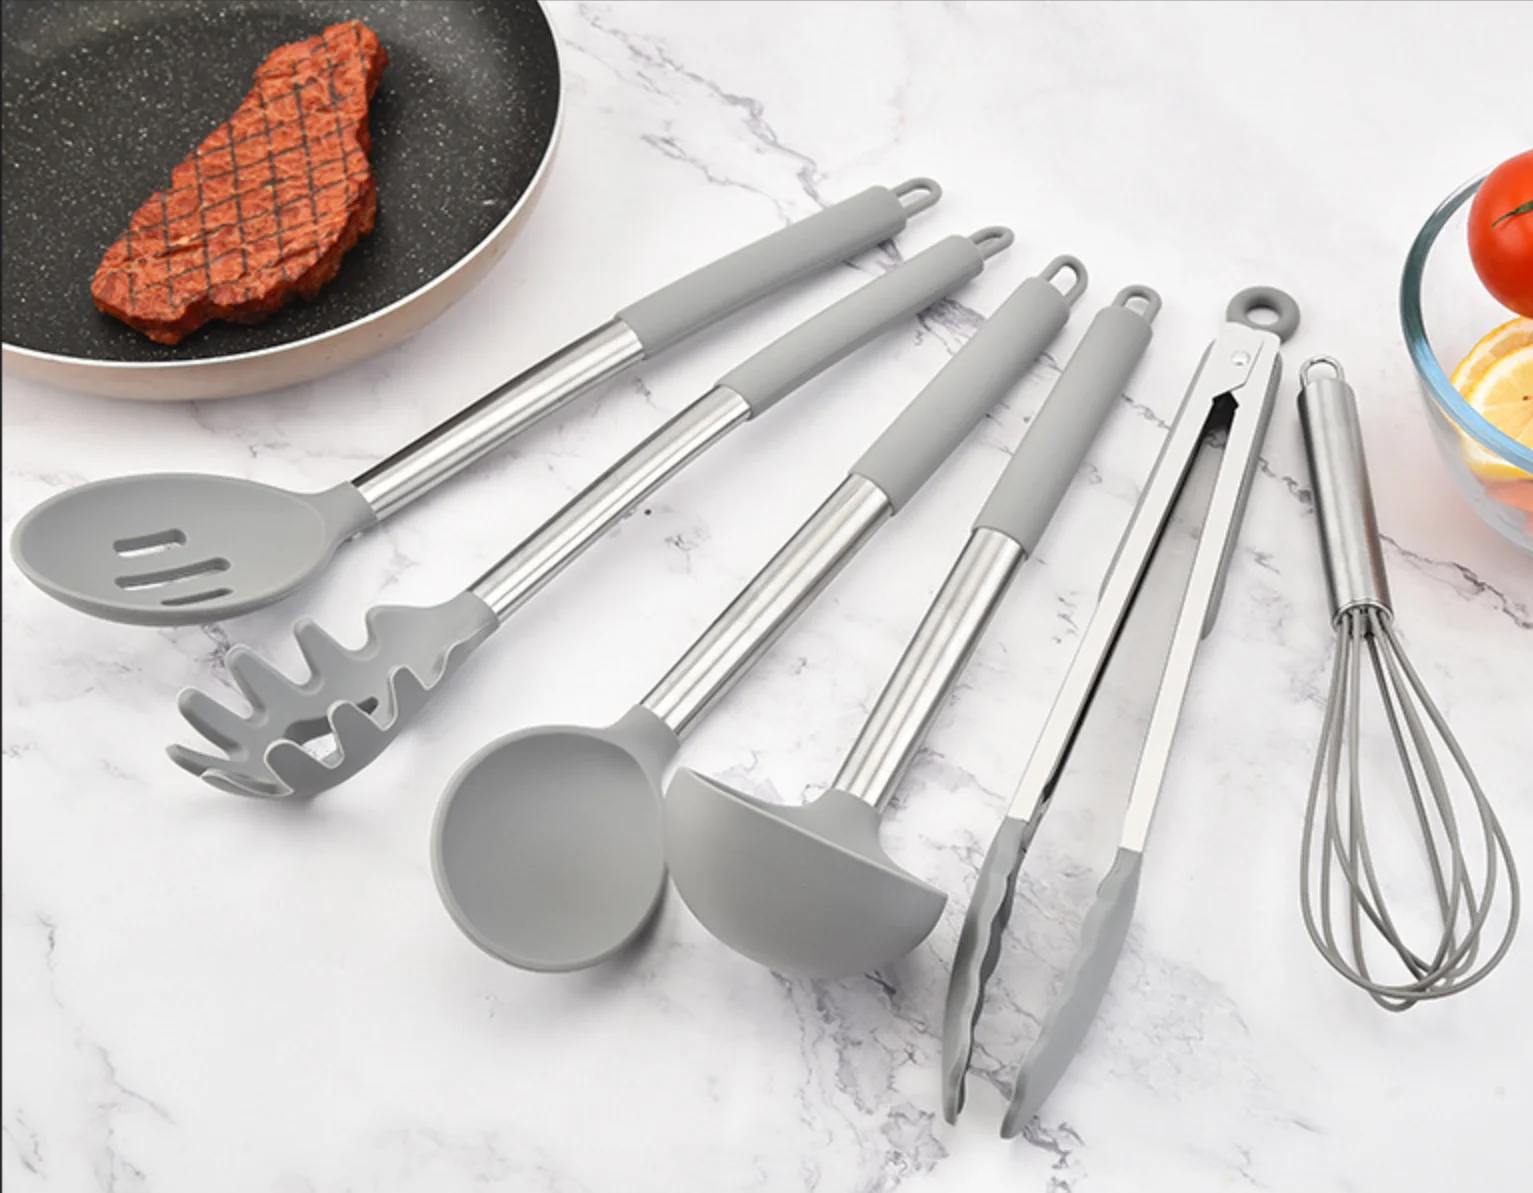 14 Pieces Kitchen cooking tools kitchenware stainless steel Handle Silicone kitchenware set